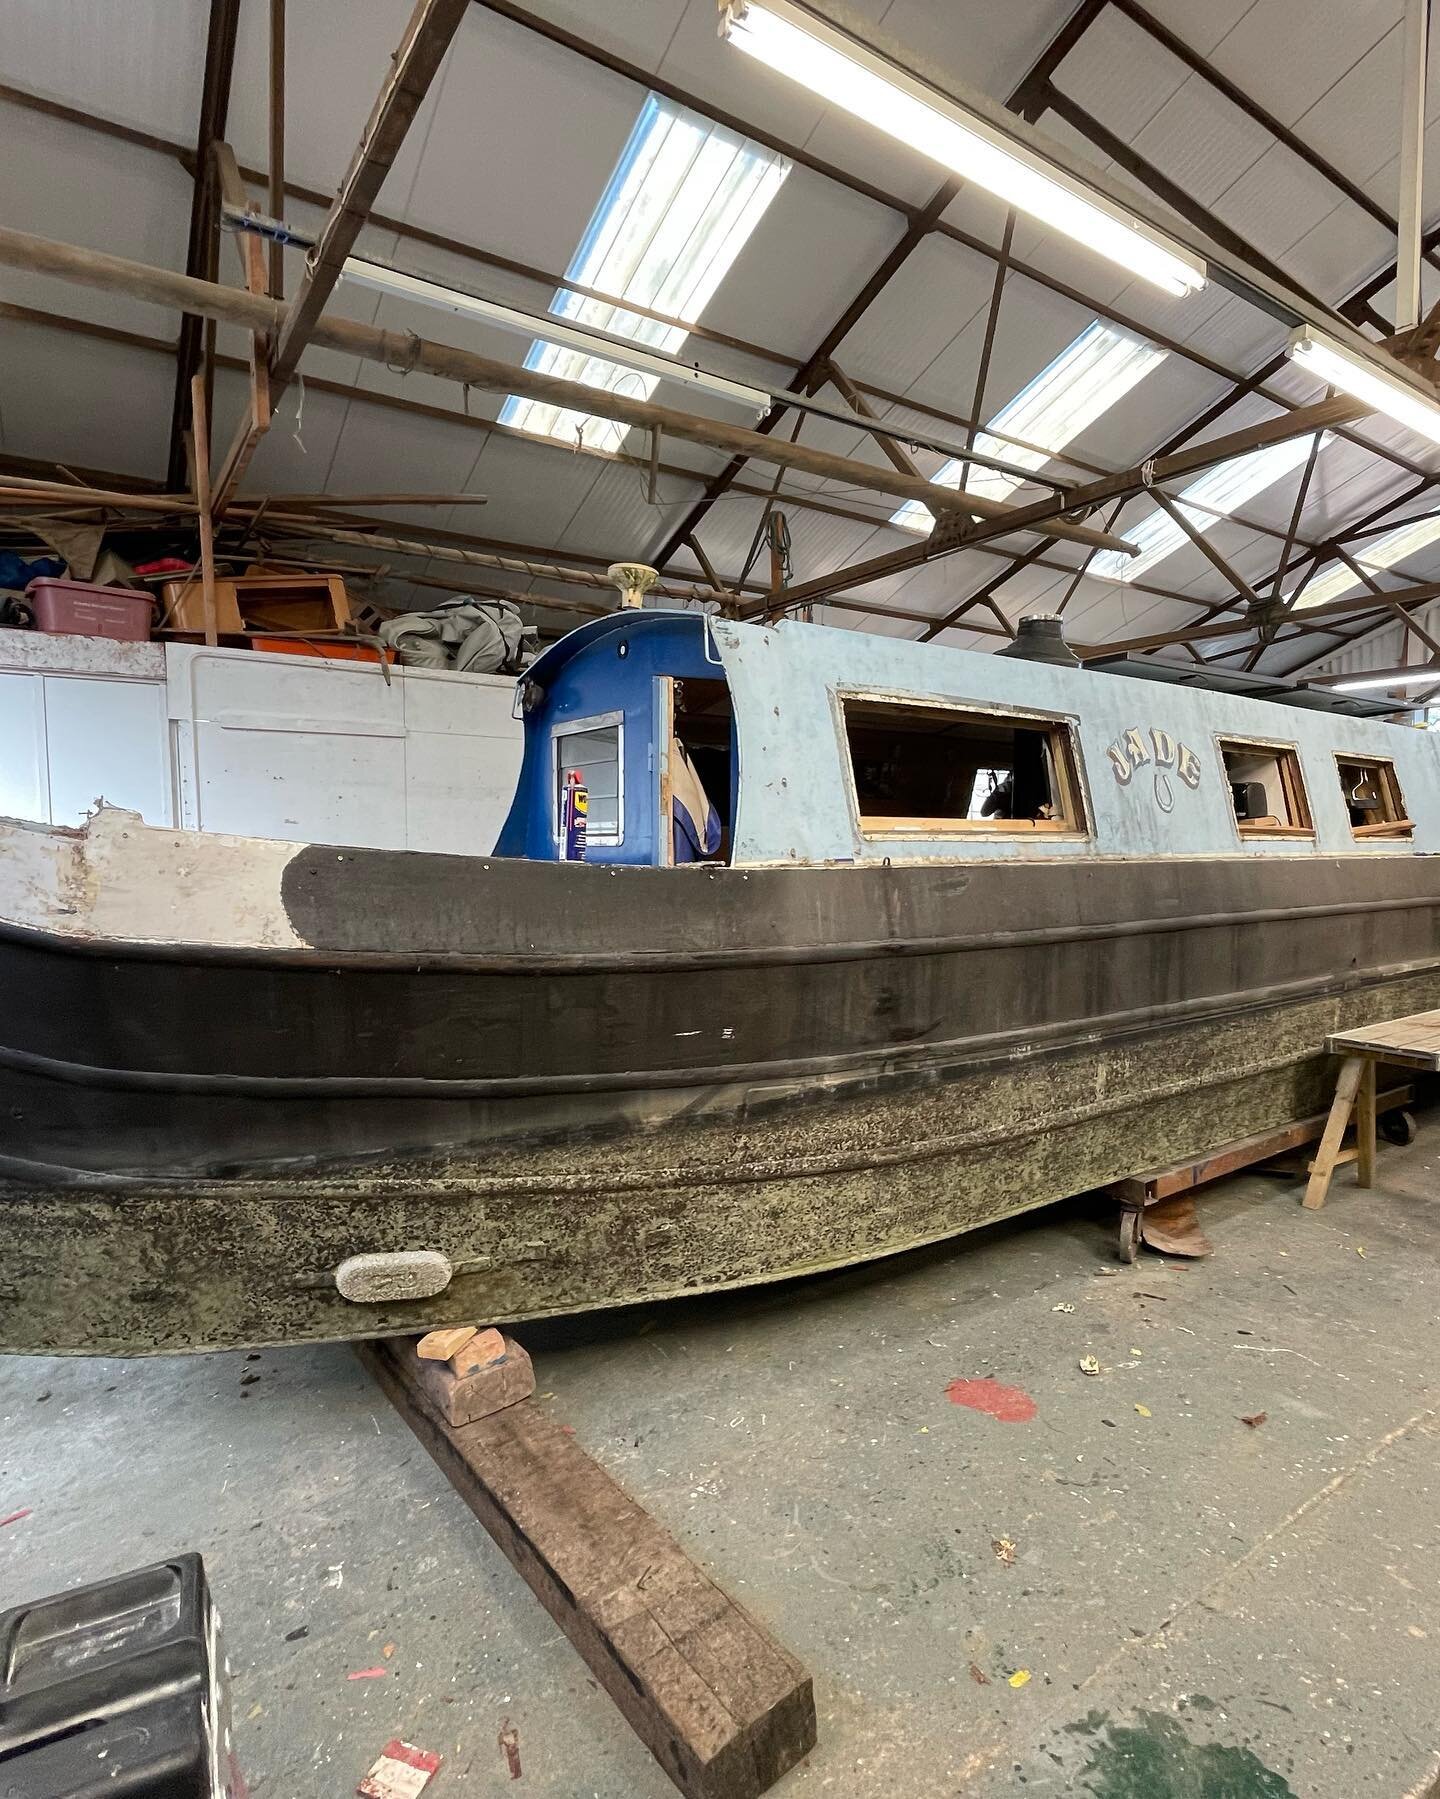 This little barge came to us for a re paint, she was a little tired and was in need of some tlc , here are some before and after pictures #bardge #boatyard #epifanes #marineindustrial #riverthames #handpainted #mirrorfinish #tattooist #henlyonthames 